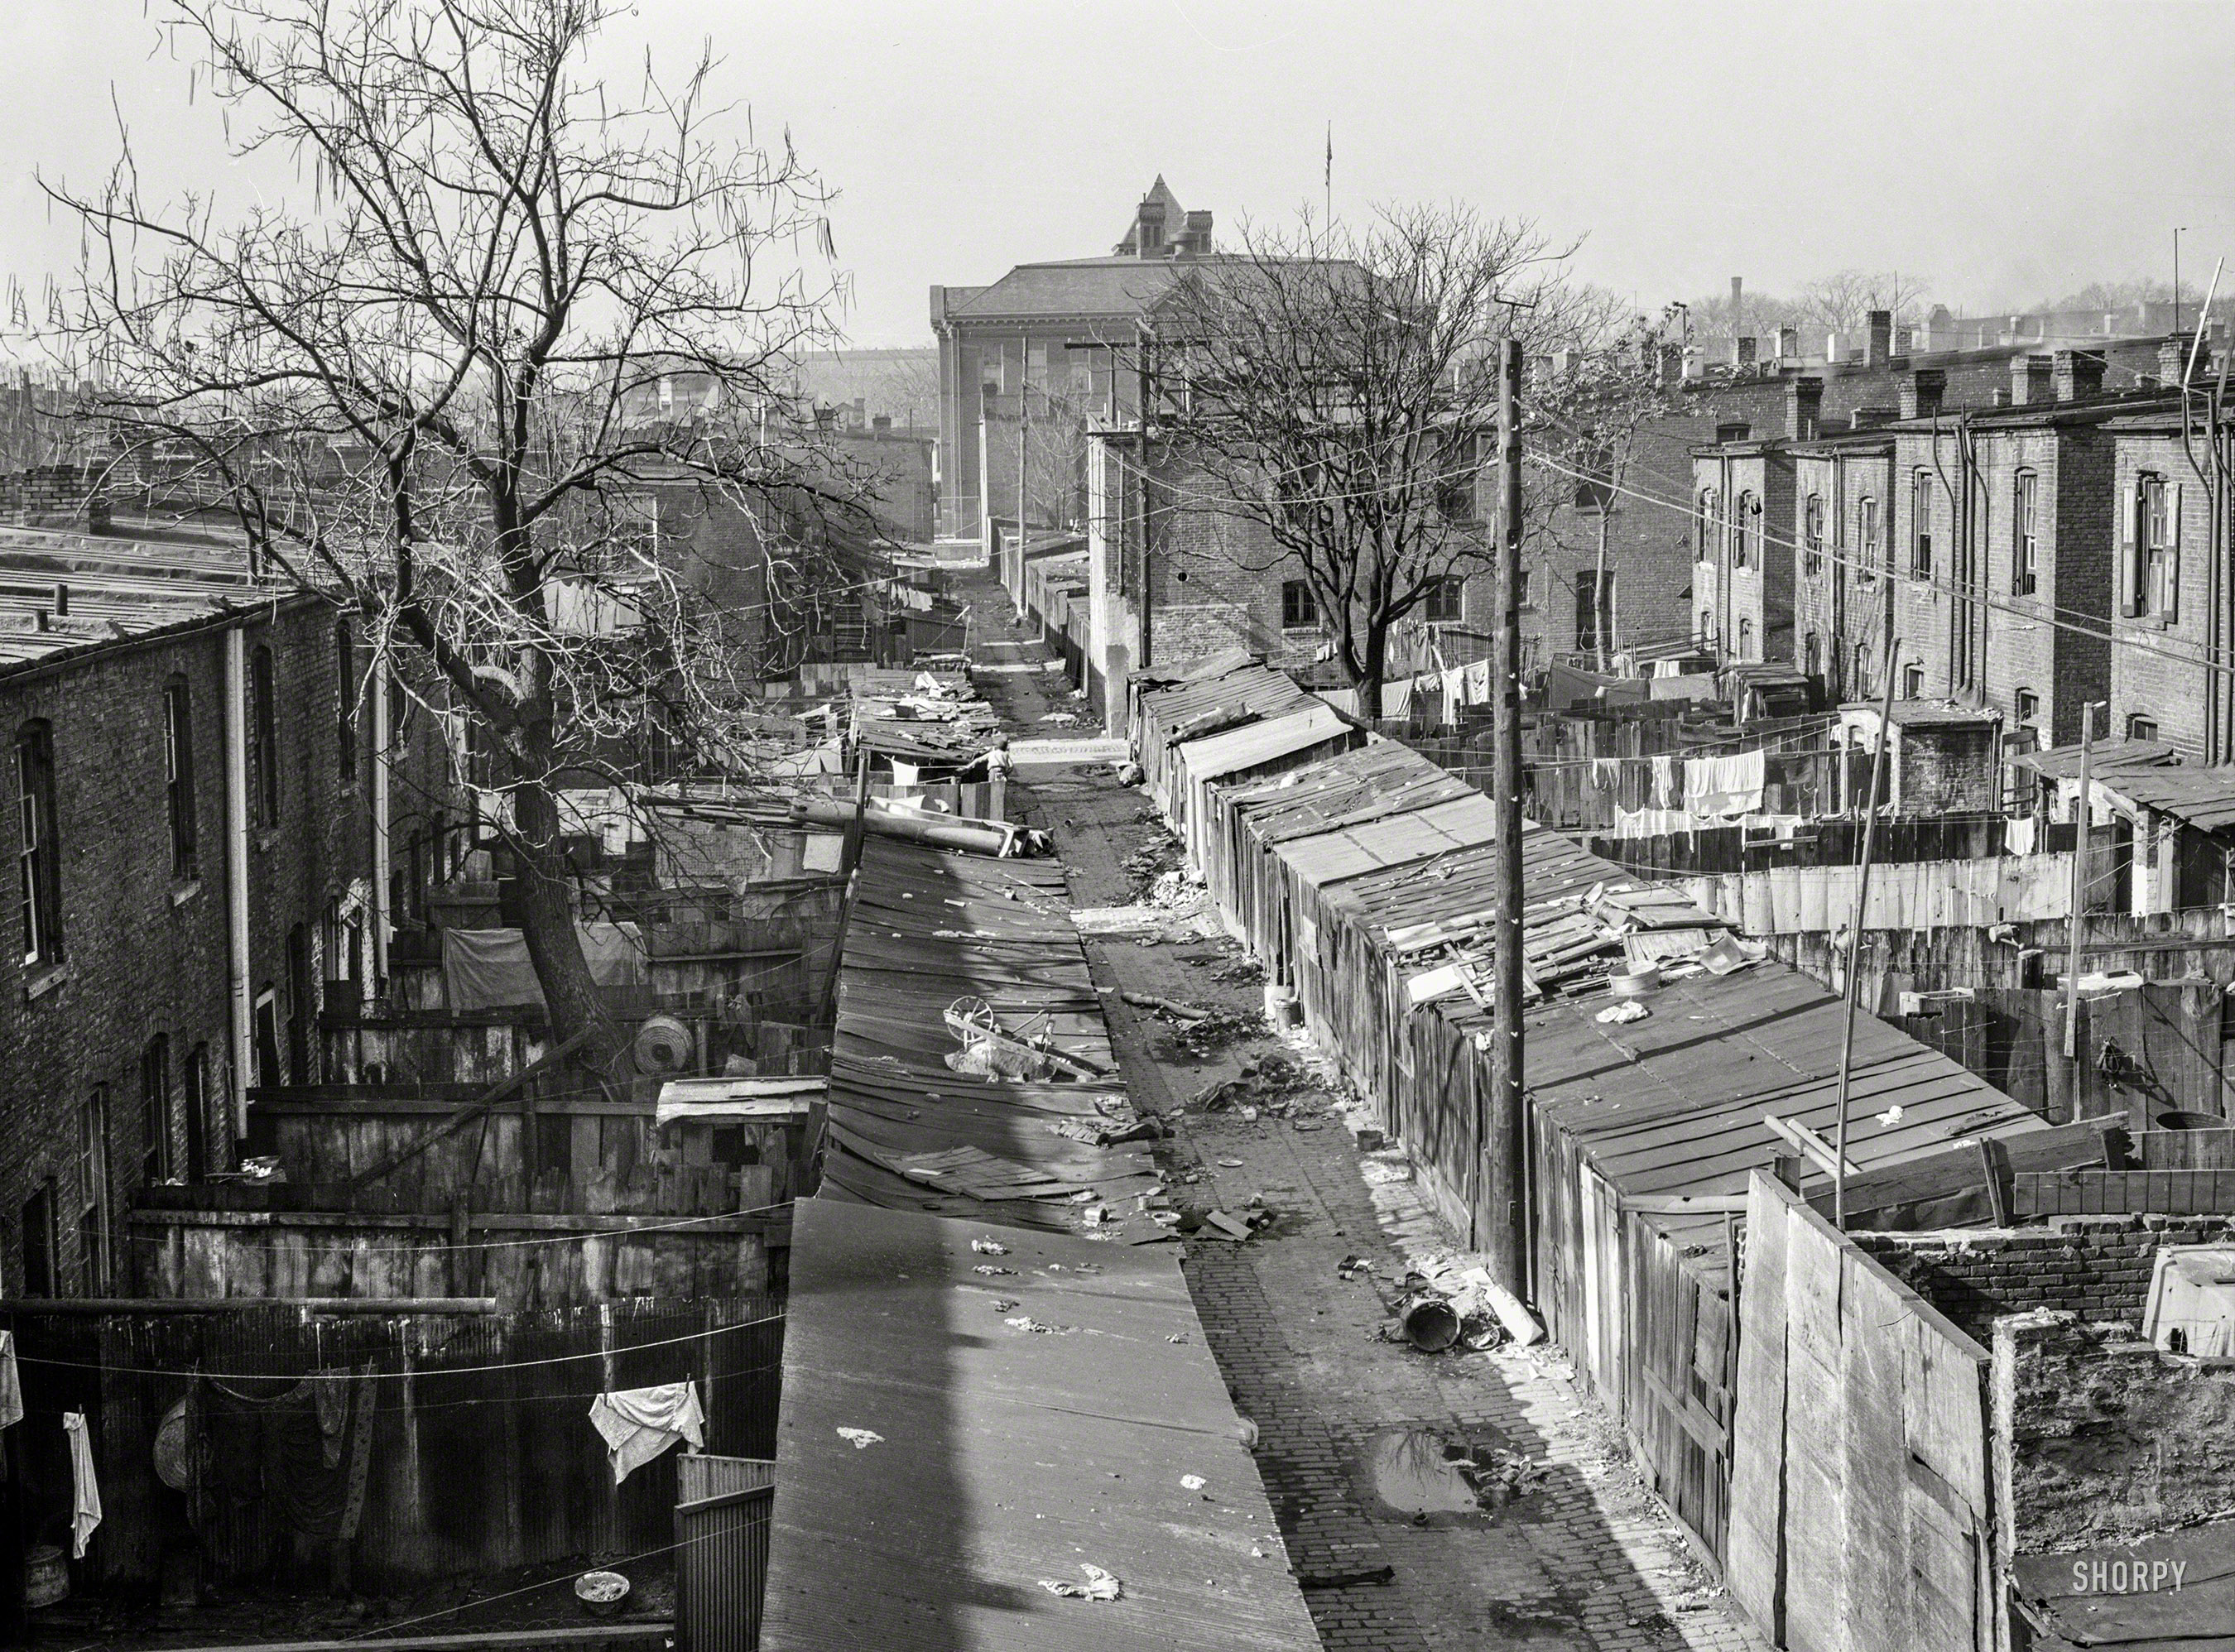 November 1935. "View of alley between K and L streets in Northwest Washington behind North Capitol Street. Blake School in background." Medium format negative by Carl Mydans for the Resettlement Administration. View full size.